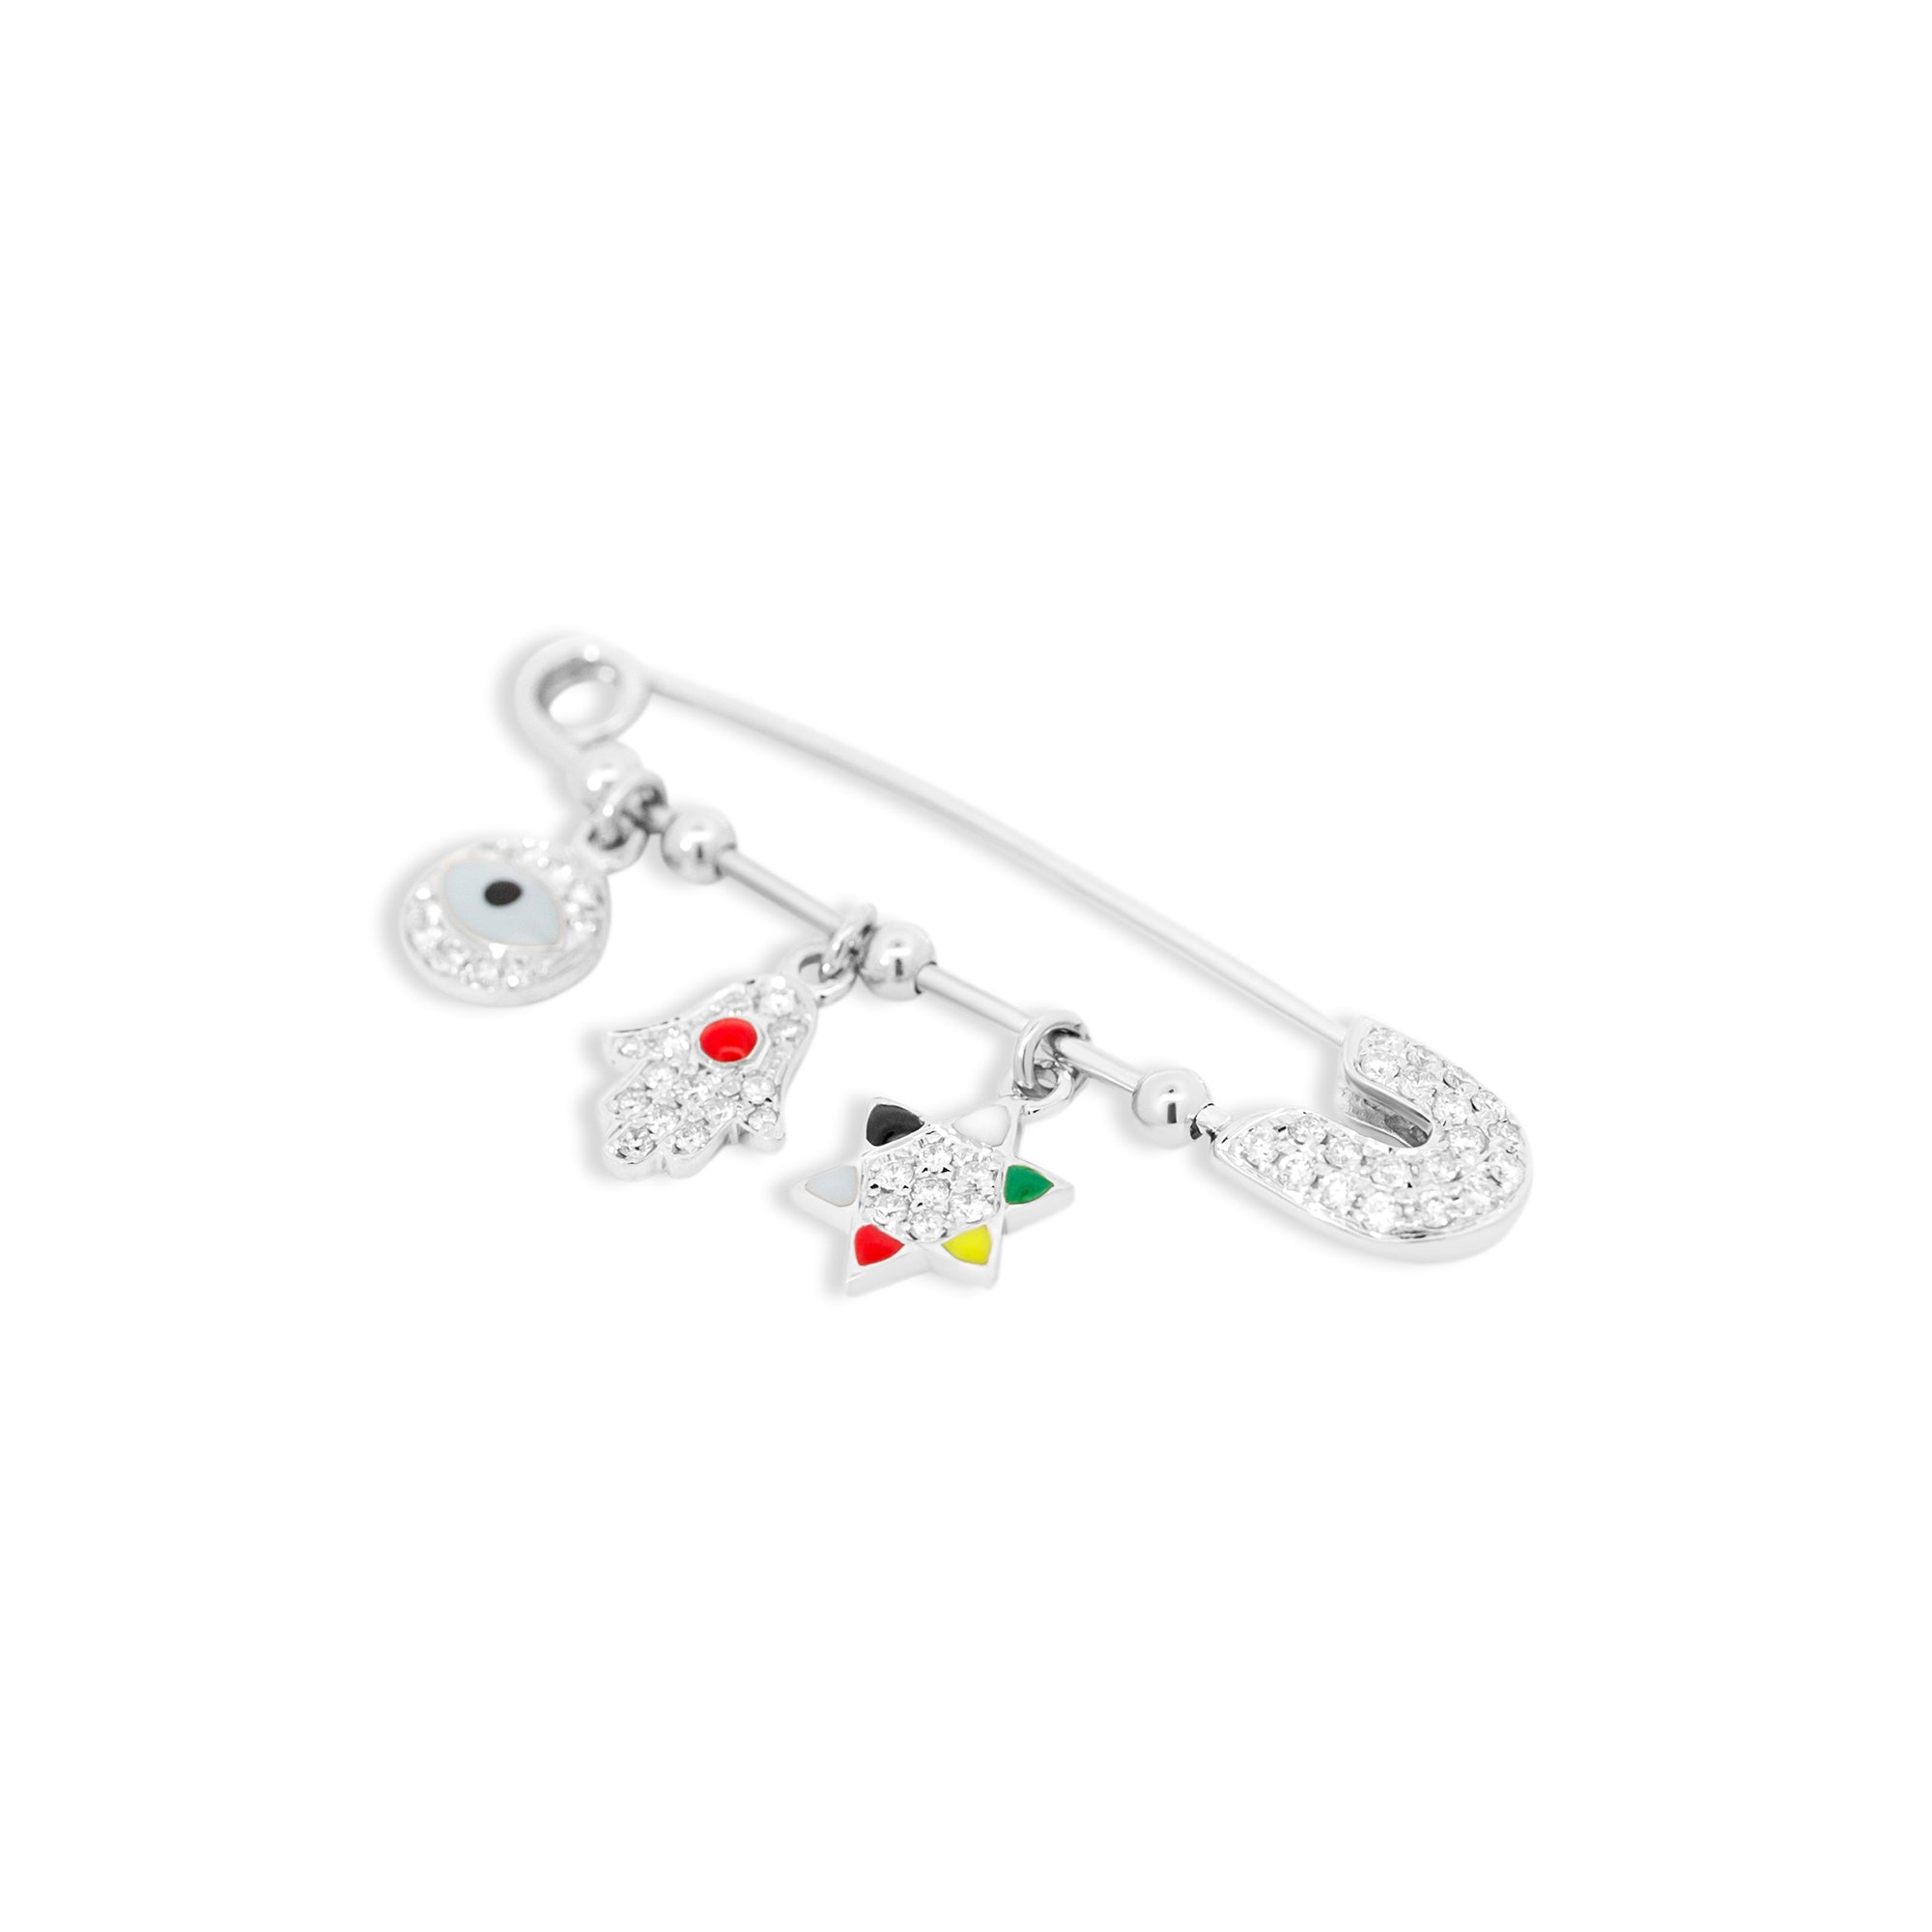 Charm Safety Pin Pendant